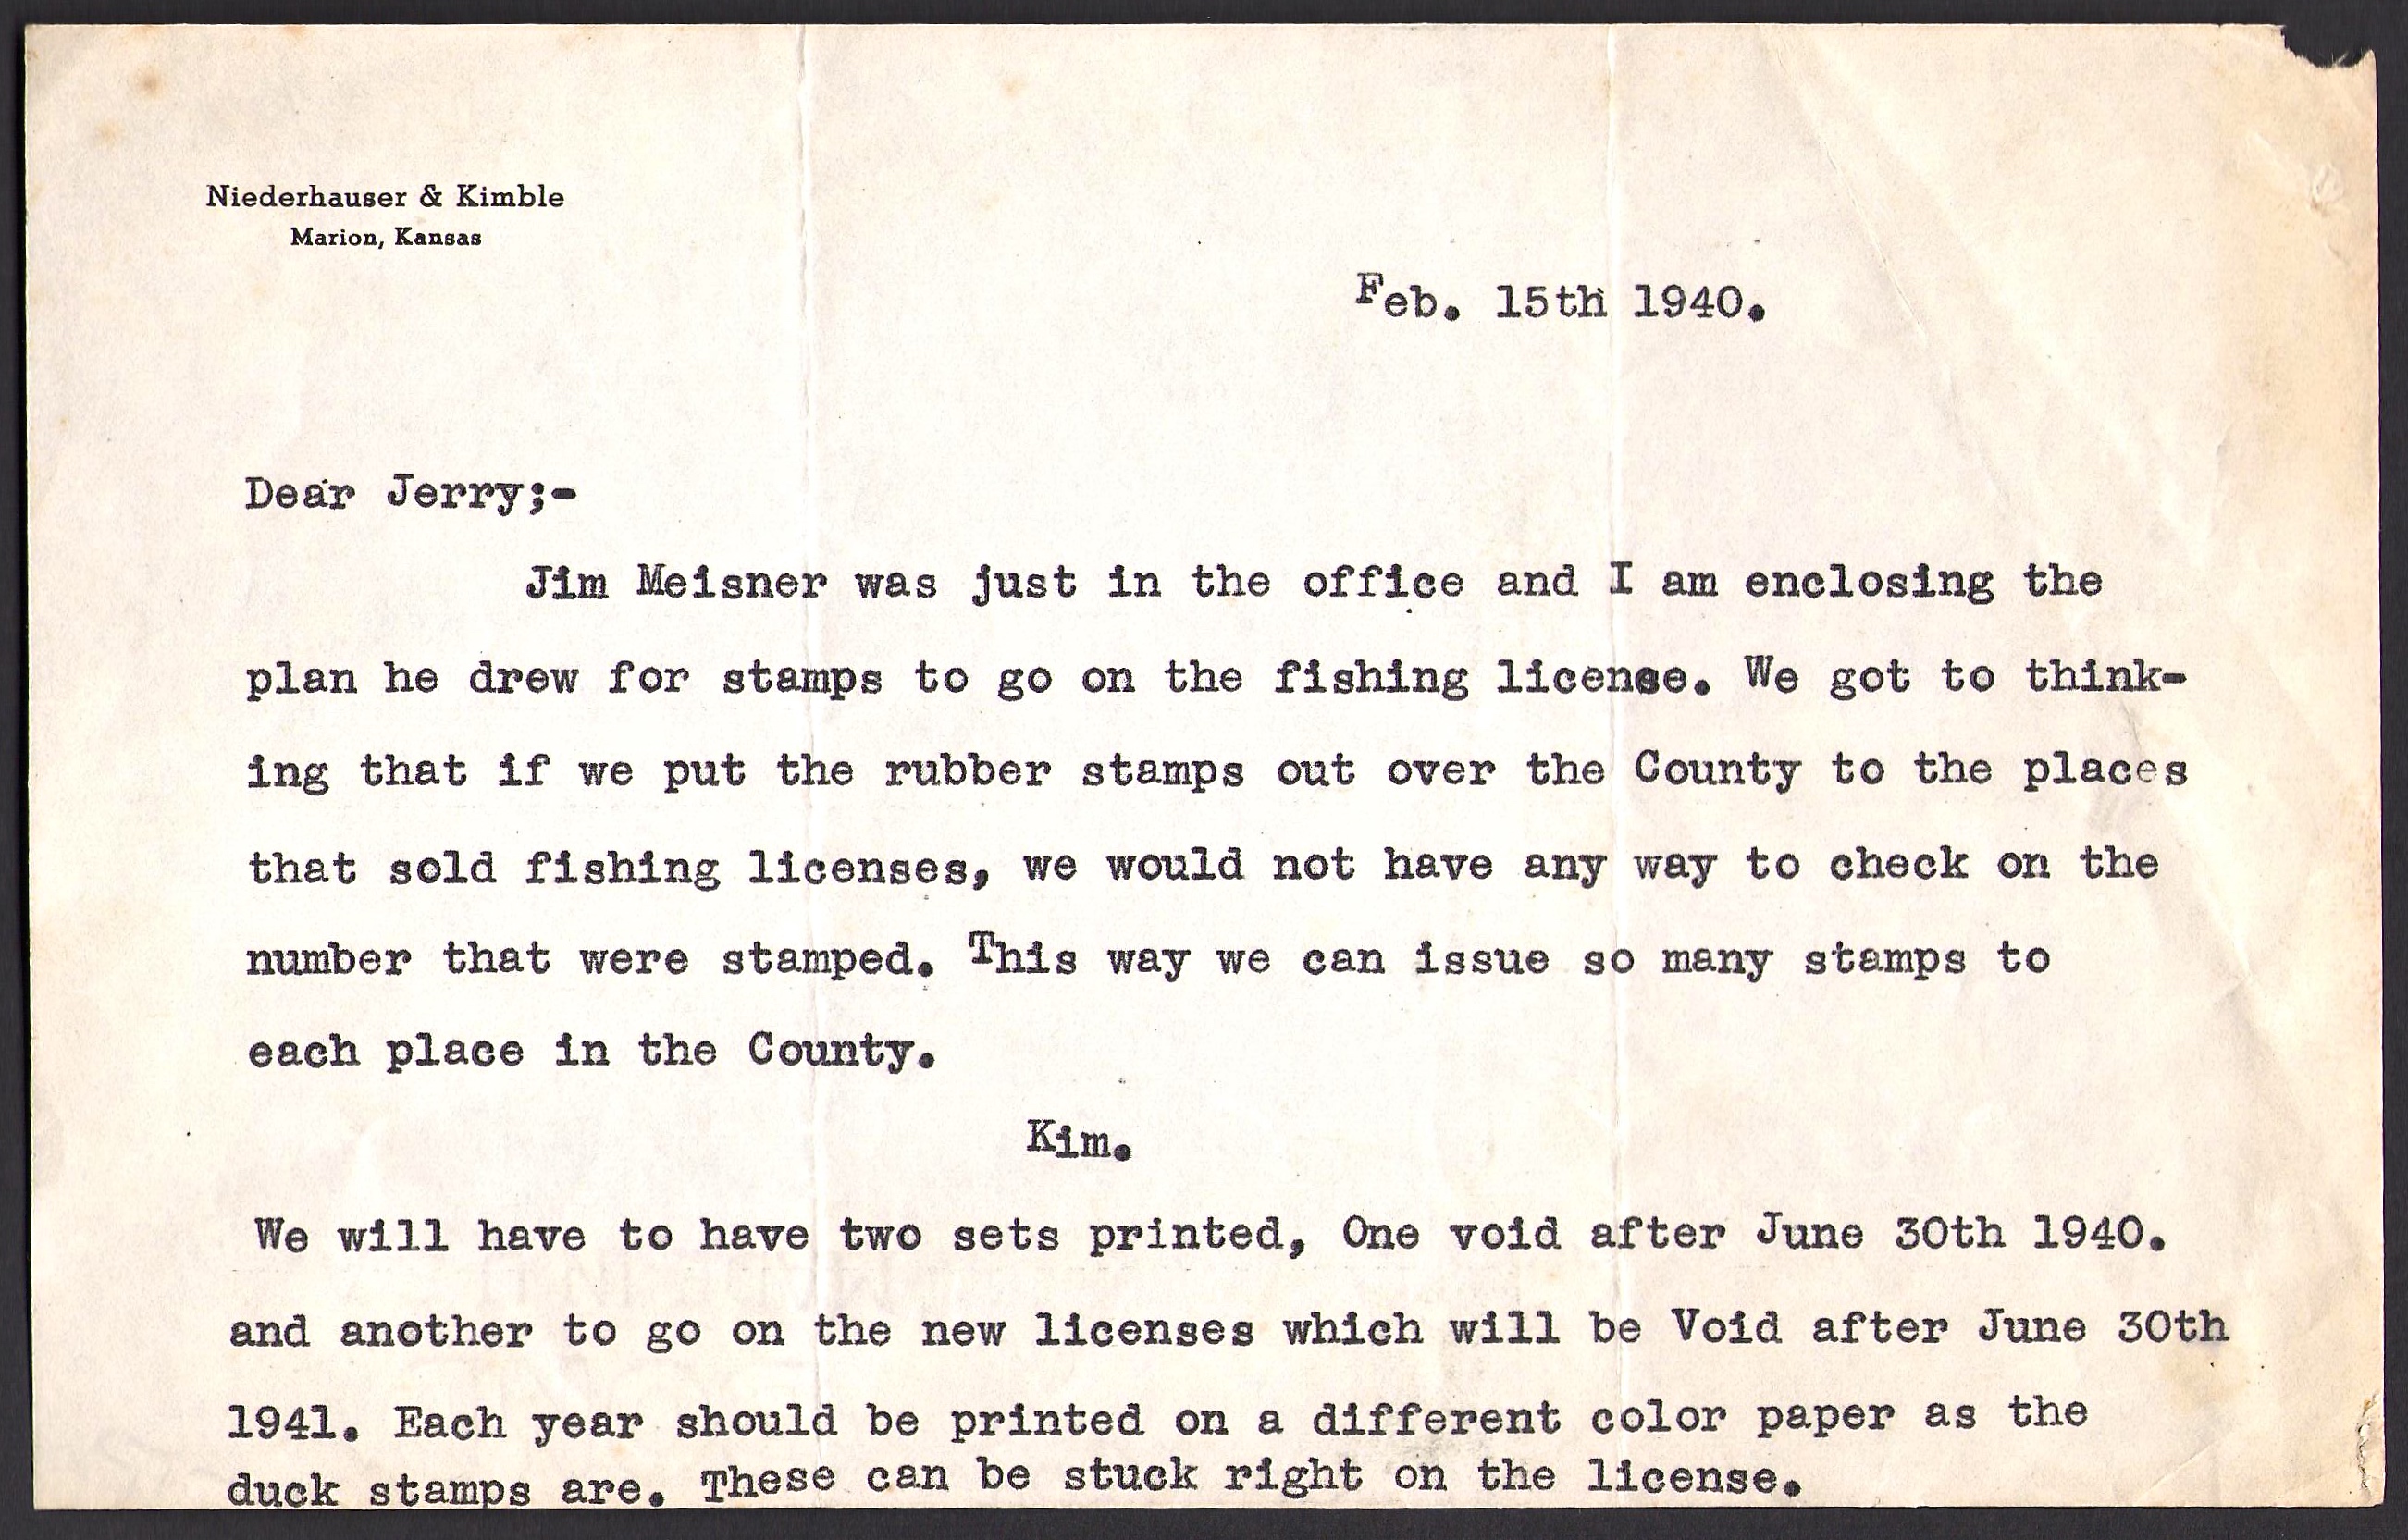 Historic Letter to Jerry Mullikin Anouncing Marion County Will Print Adhesive Stamps